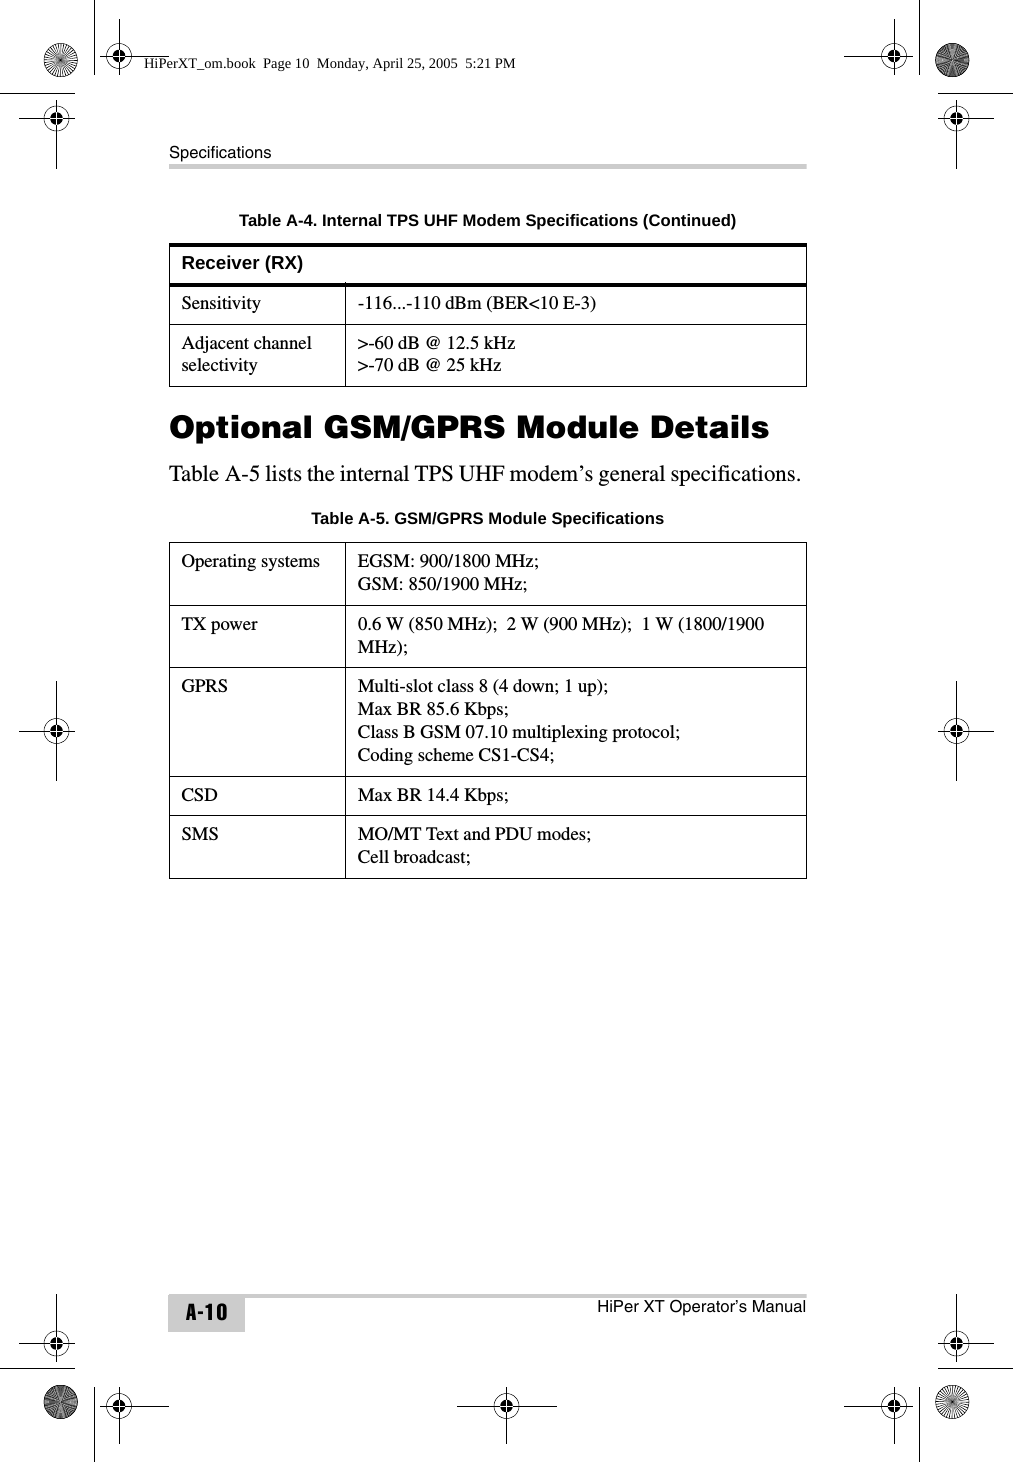 SpecificationsHiPer XT Operator’s ManualA-10Optional GSM/GPRS Module DetailsTable A-5 lists the internal TPS UHF modem’s general specifications. Receiver (RX)Sensitivity -116...-110 dBm (BER&lt;10 E-3)Adjacent channel selectivity&gt;-60 dB @ 12.5 kHz&gt;-70 dB @ 25 kHzTable A-5. GSM/GPRS Module SpecificationsOperating systems EGSM: 900/1800 MHz;GSM: 850/1900 MHz;TX power 0.6 W (850 MHz);  2 W (900 MHz);  1 W (1800/1900 MHz);GPRS Multi-slot class 8 (4 down; 1 up);Max BR 85.6 Kbps;Class B GSM 07.10 multiplexing protocol;Coding scheme CS1-CS4;CSD  Max BR 14.4 Kbps;SMS MO/MT Text and PDU modes;Cell broadcast;Table A-4. Internal TPS UHF Modem Specifications (Continued)HiPerXT_om.book  Page 10  Monday, April 25, 2005  5:21 PM